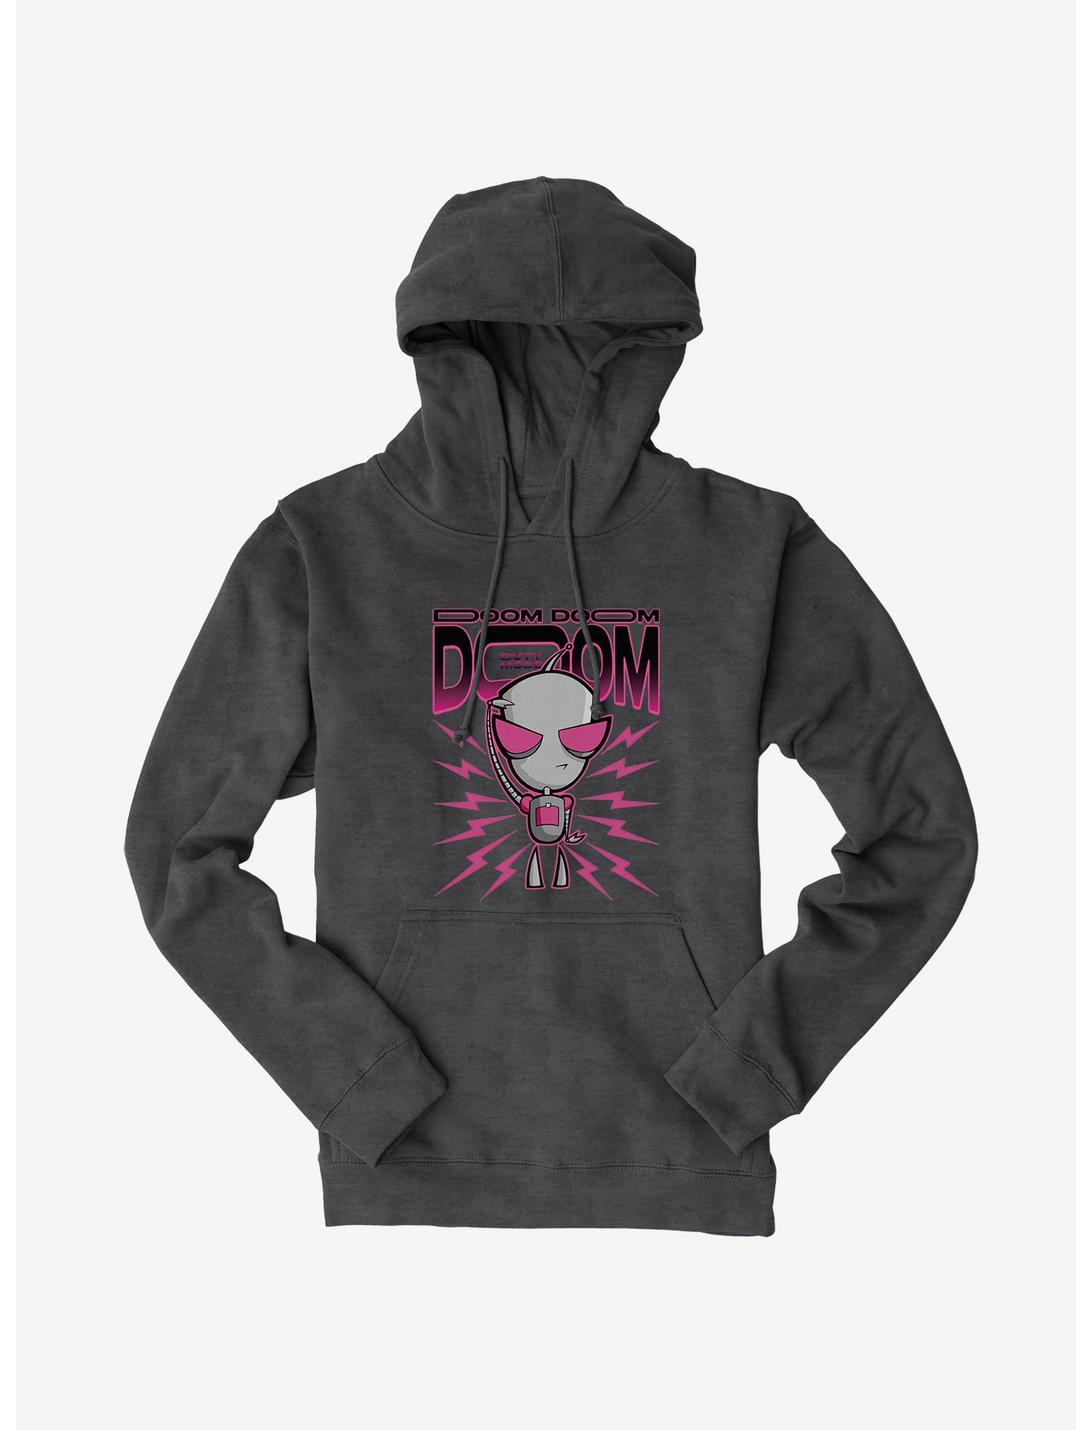 Invader Zim Unique Duty Mode Hoodie, CHARCOAL HEATHER, hi-res